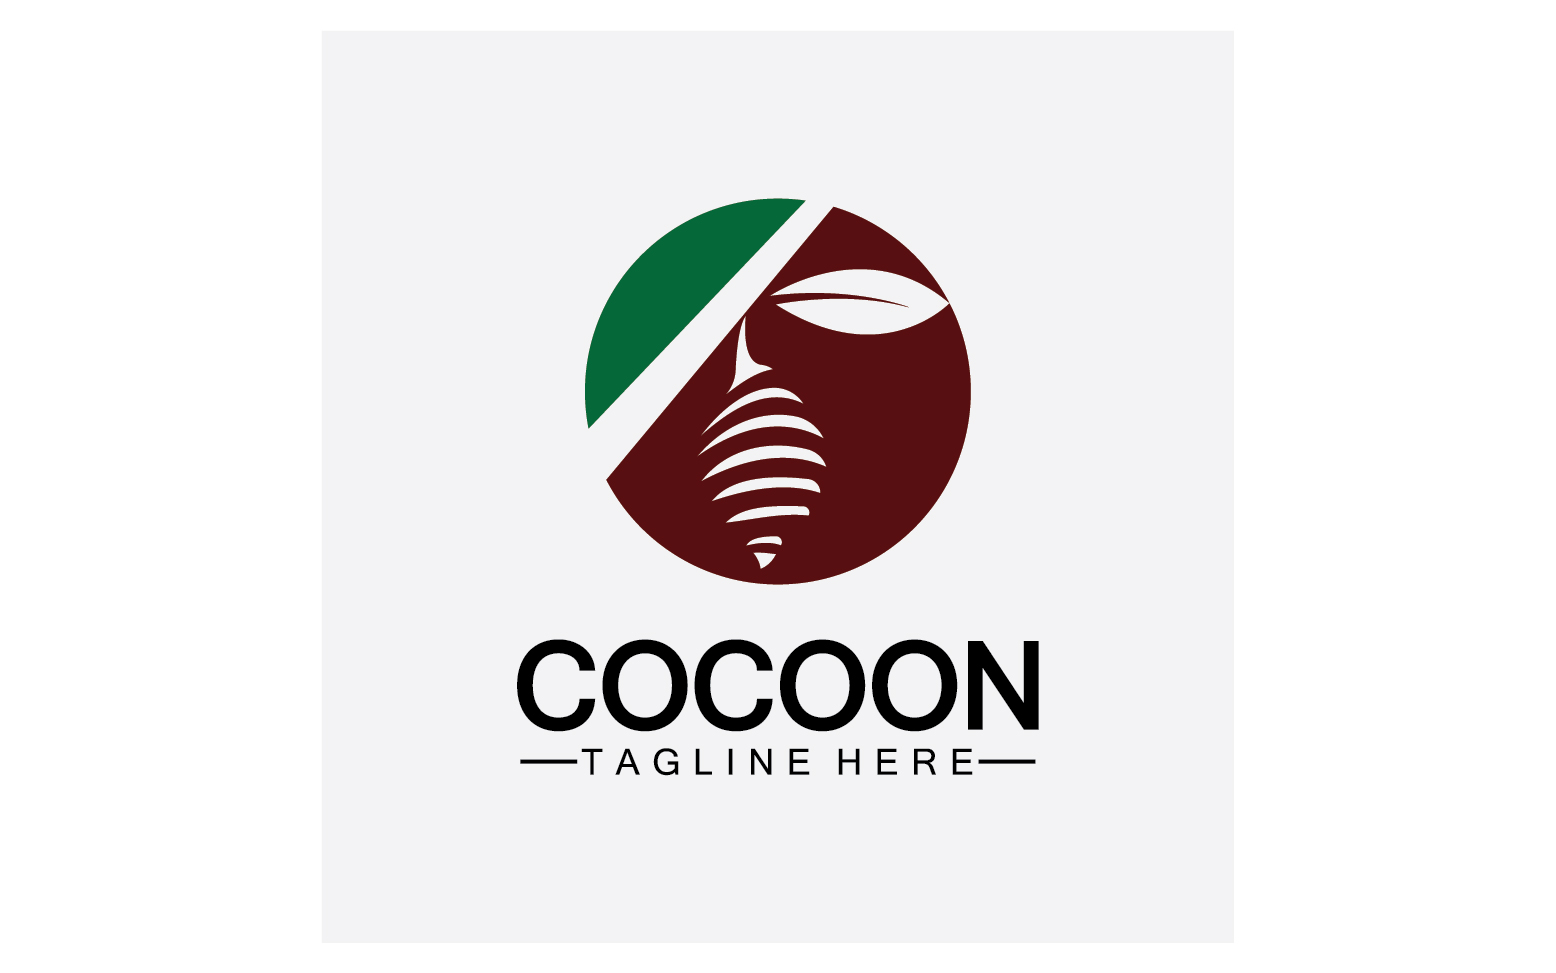 Cocoon butterfly logo icon vector v36